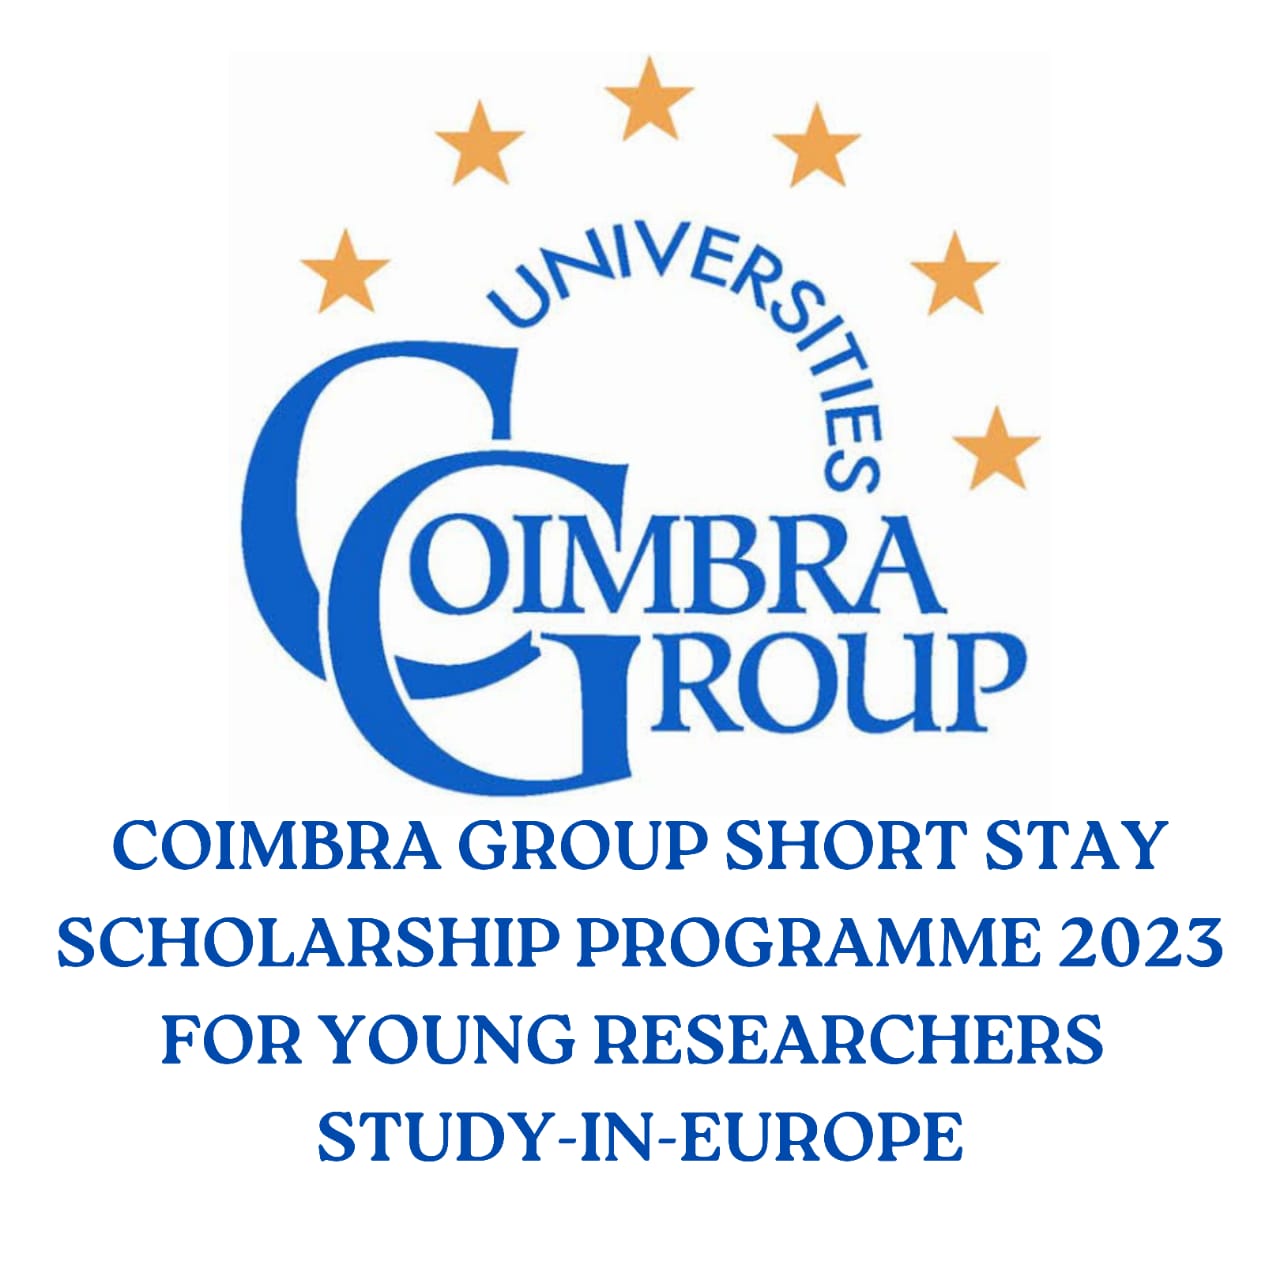 WhatsApp Image 2023 02 13 at 6.41.09 PM 1 - Coimbra Group Short Stay Scholarship Programme 2023 for Young Researchers | Study-In-Europe